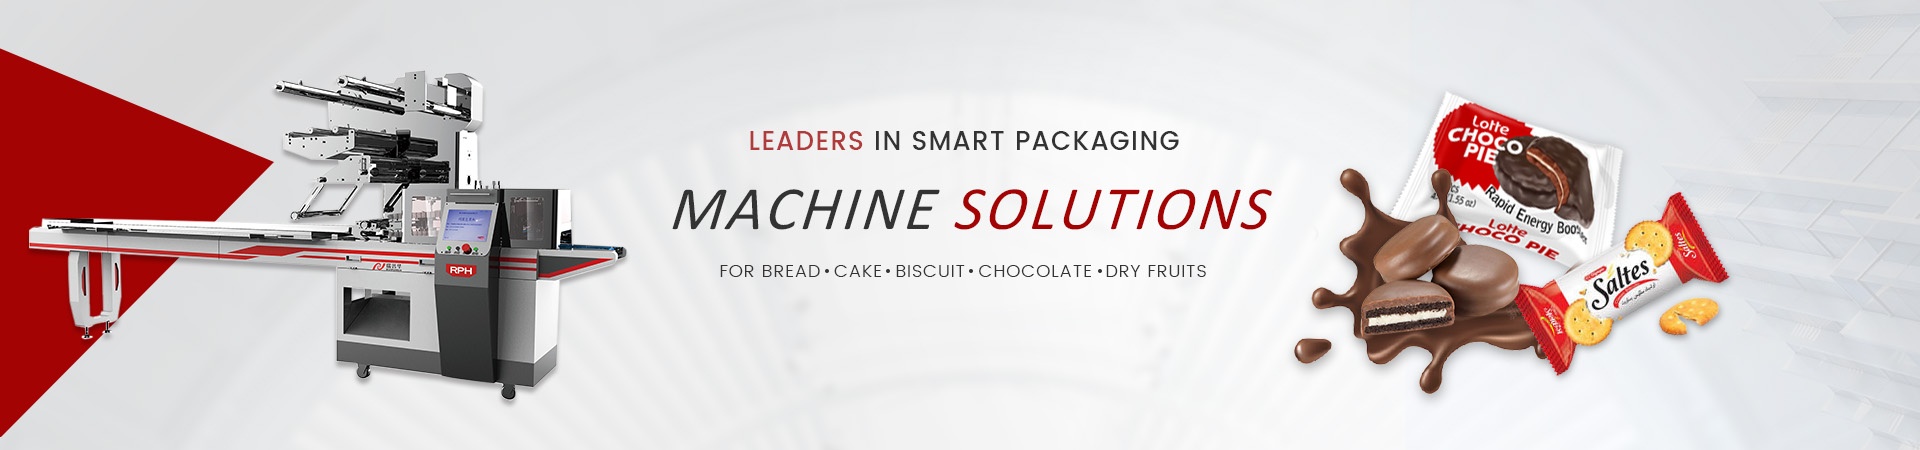 Revolutionizing the Food Industry: Cutting-Edge Packaging Machinery